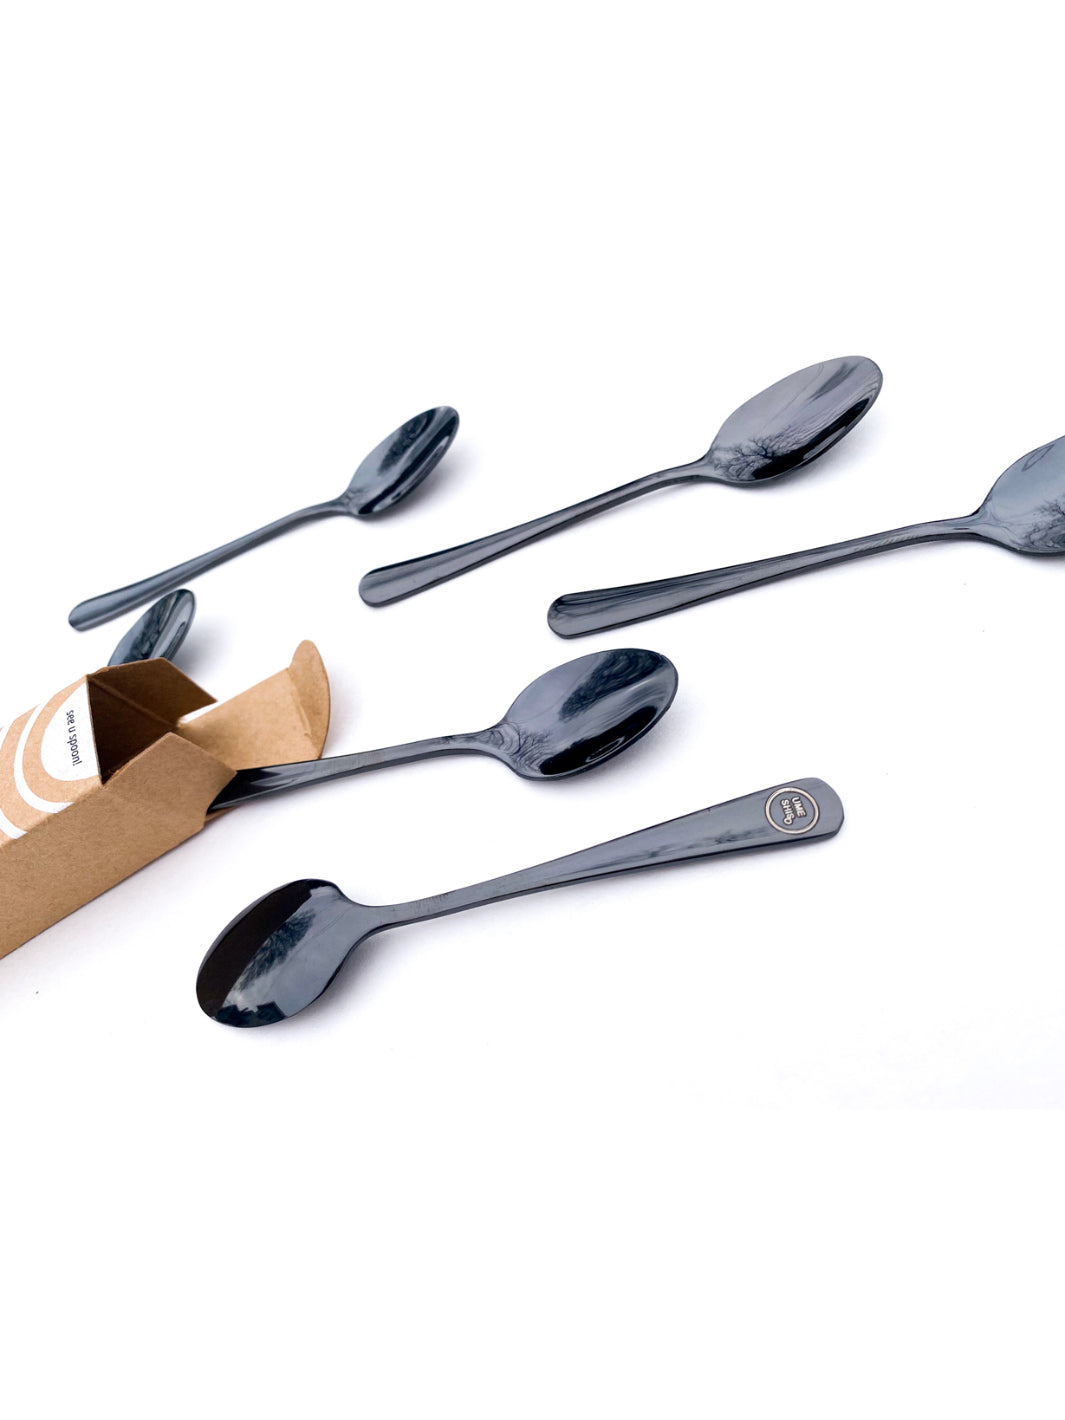 Umeshiso's Little Dipper Is the Best Spoon, According to Our Spoon